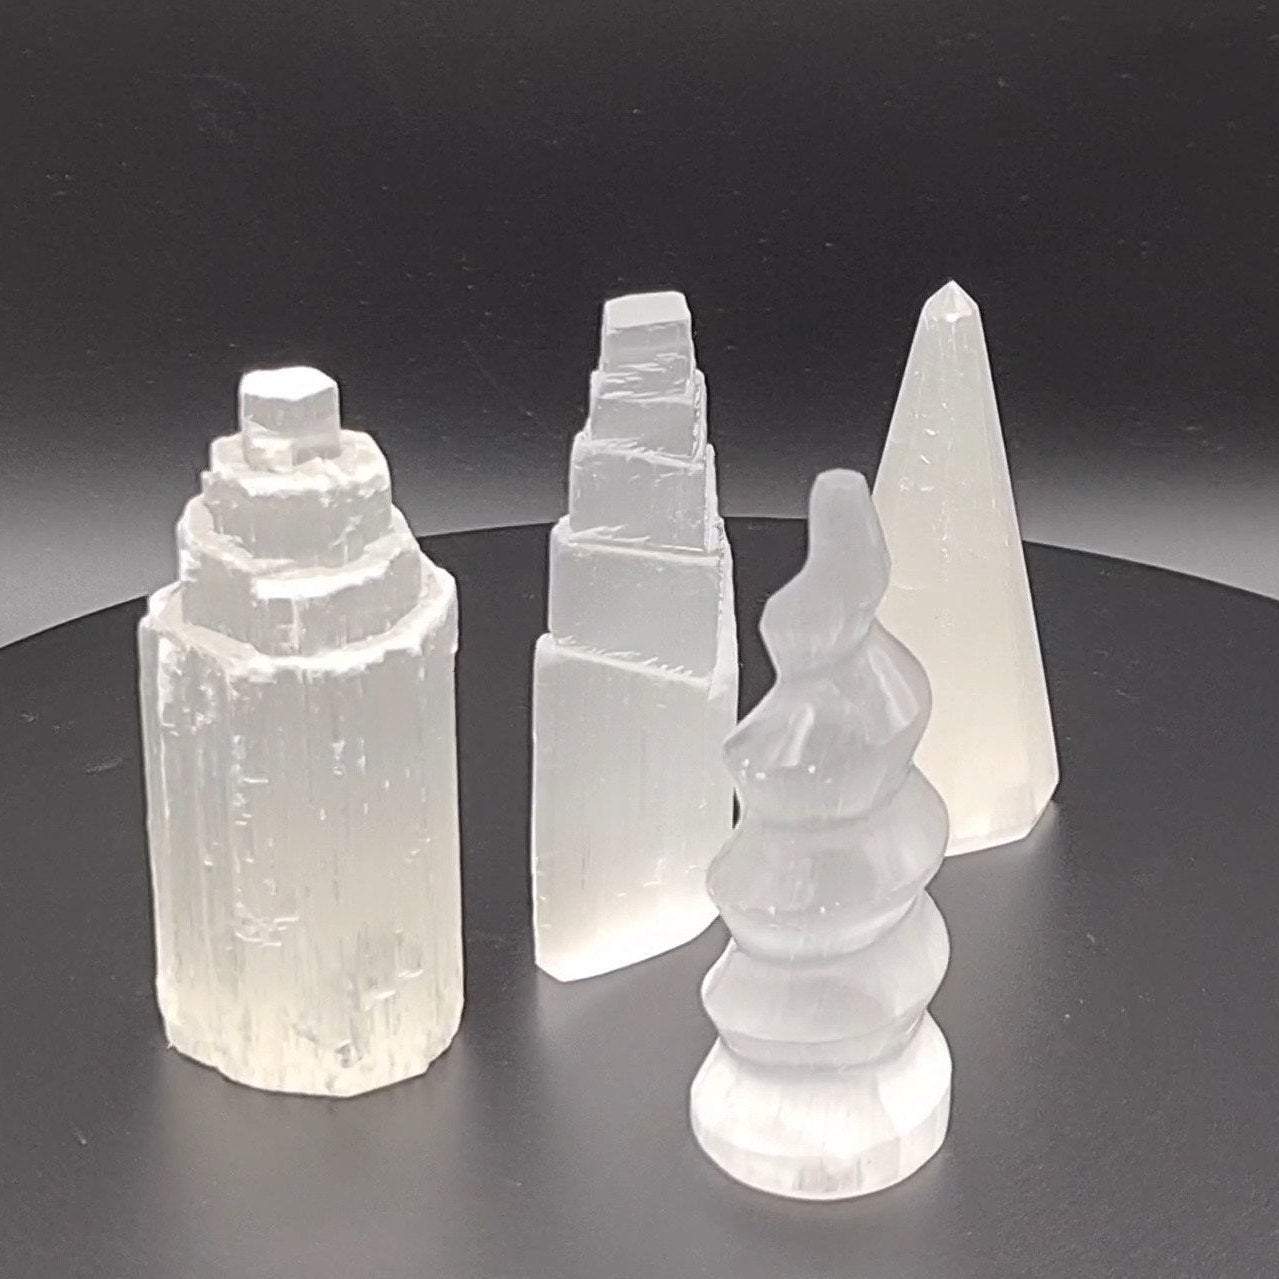 What are the benefits of selenite?